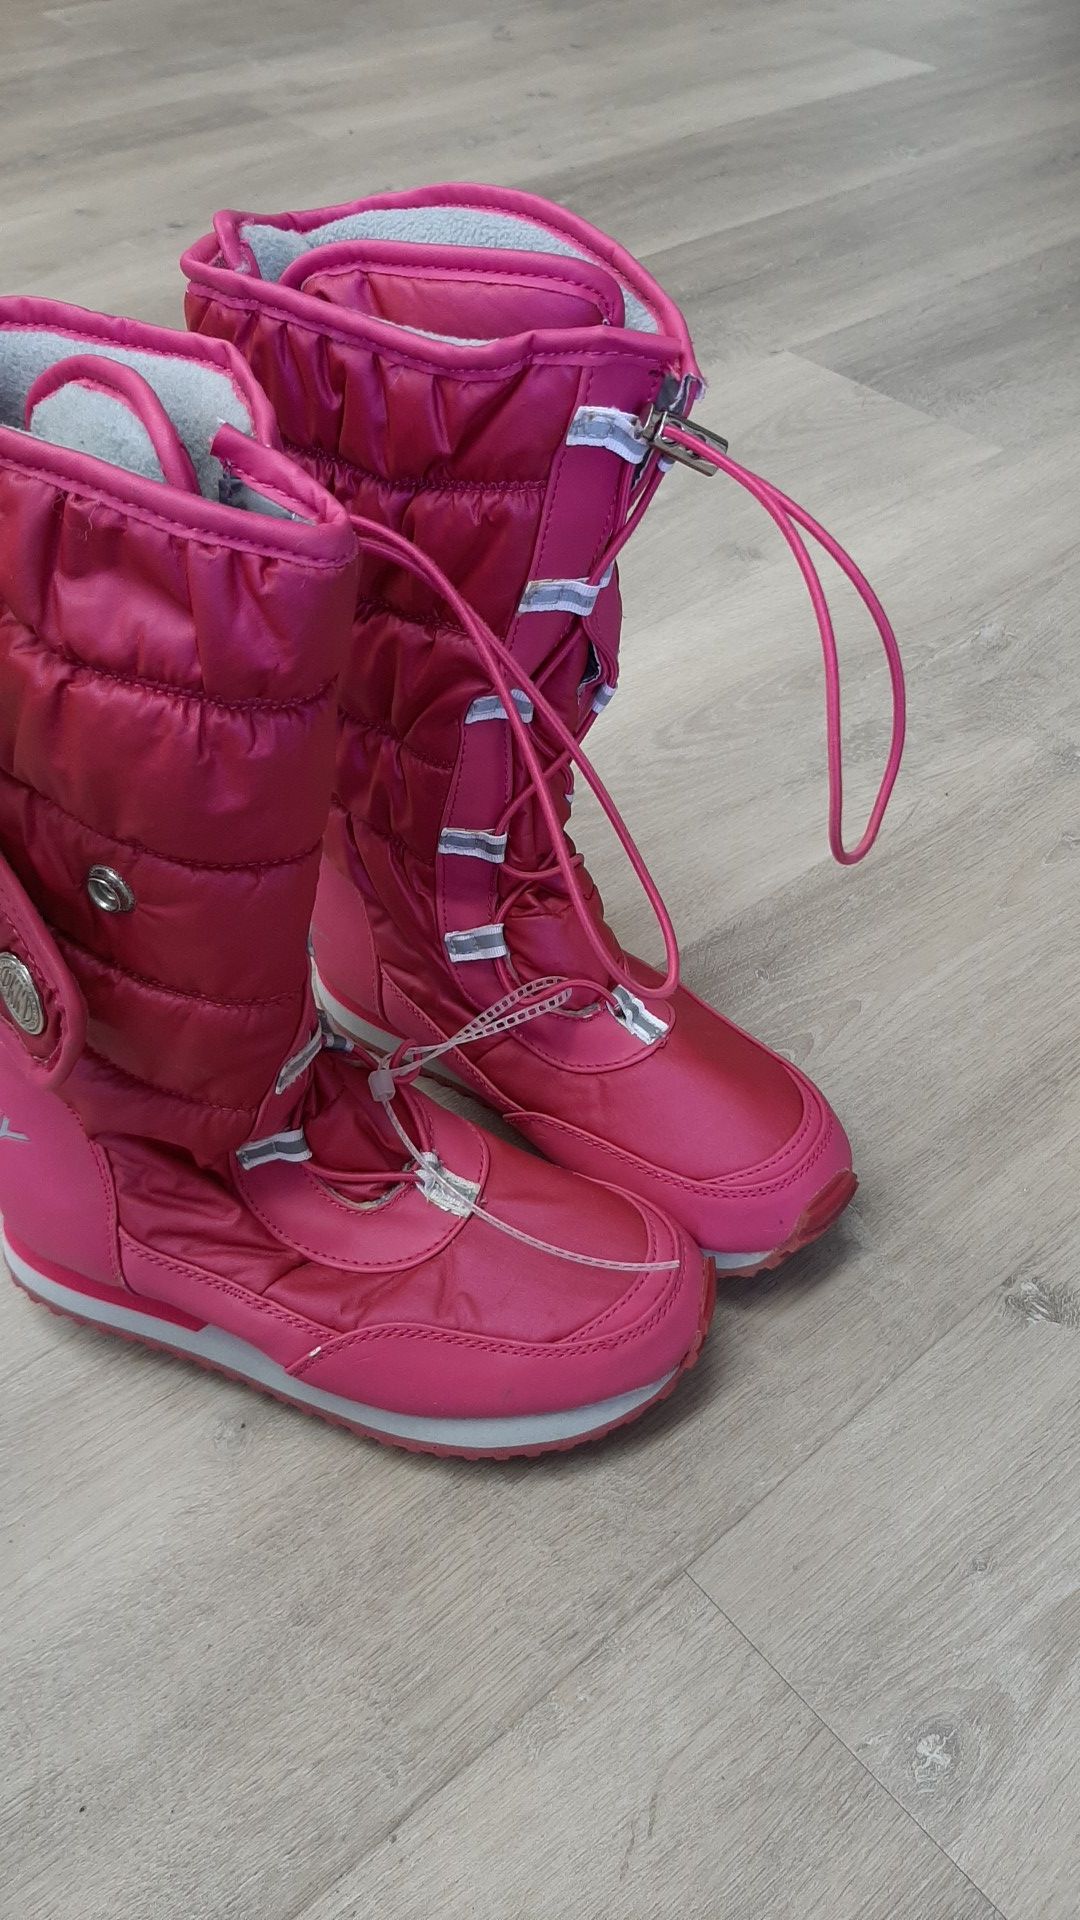 Girl size 2 snow boots